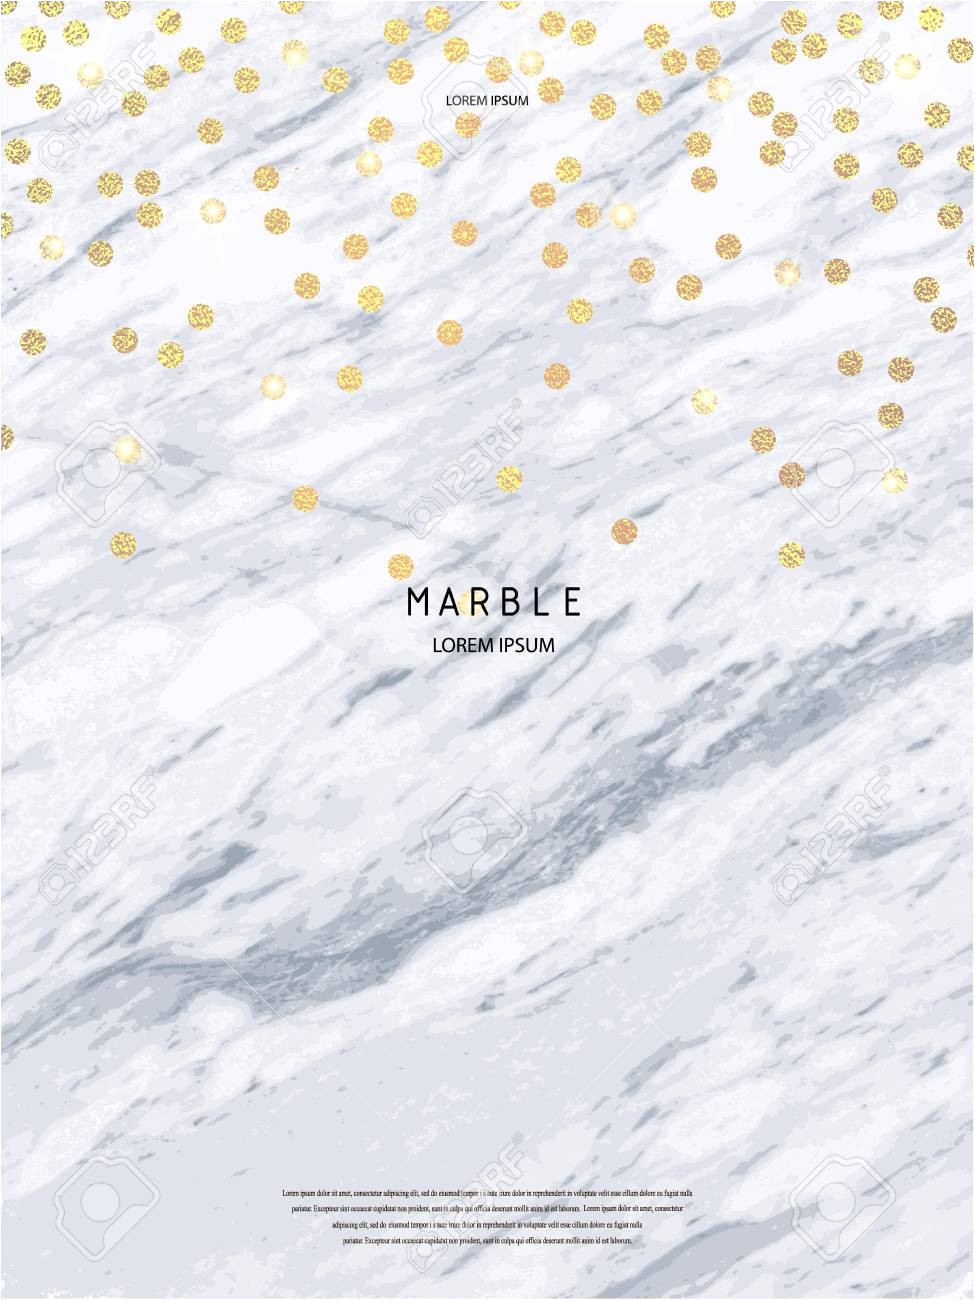 109180272 marble texture trendy template for new year party wedding birthday flyers logo party invitation card jpg